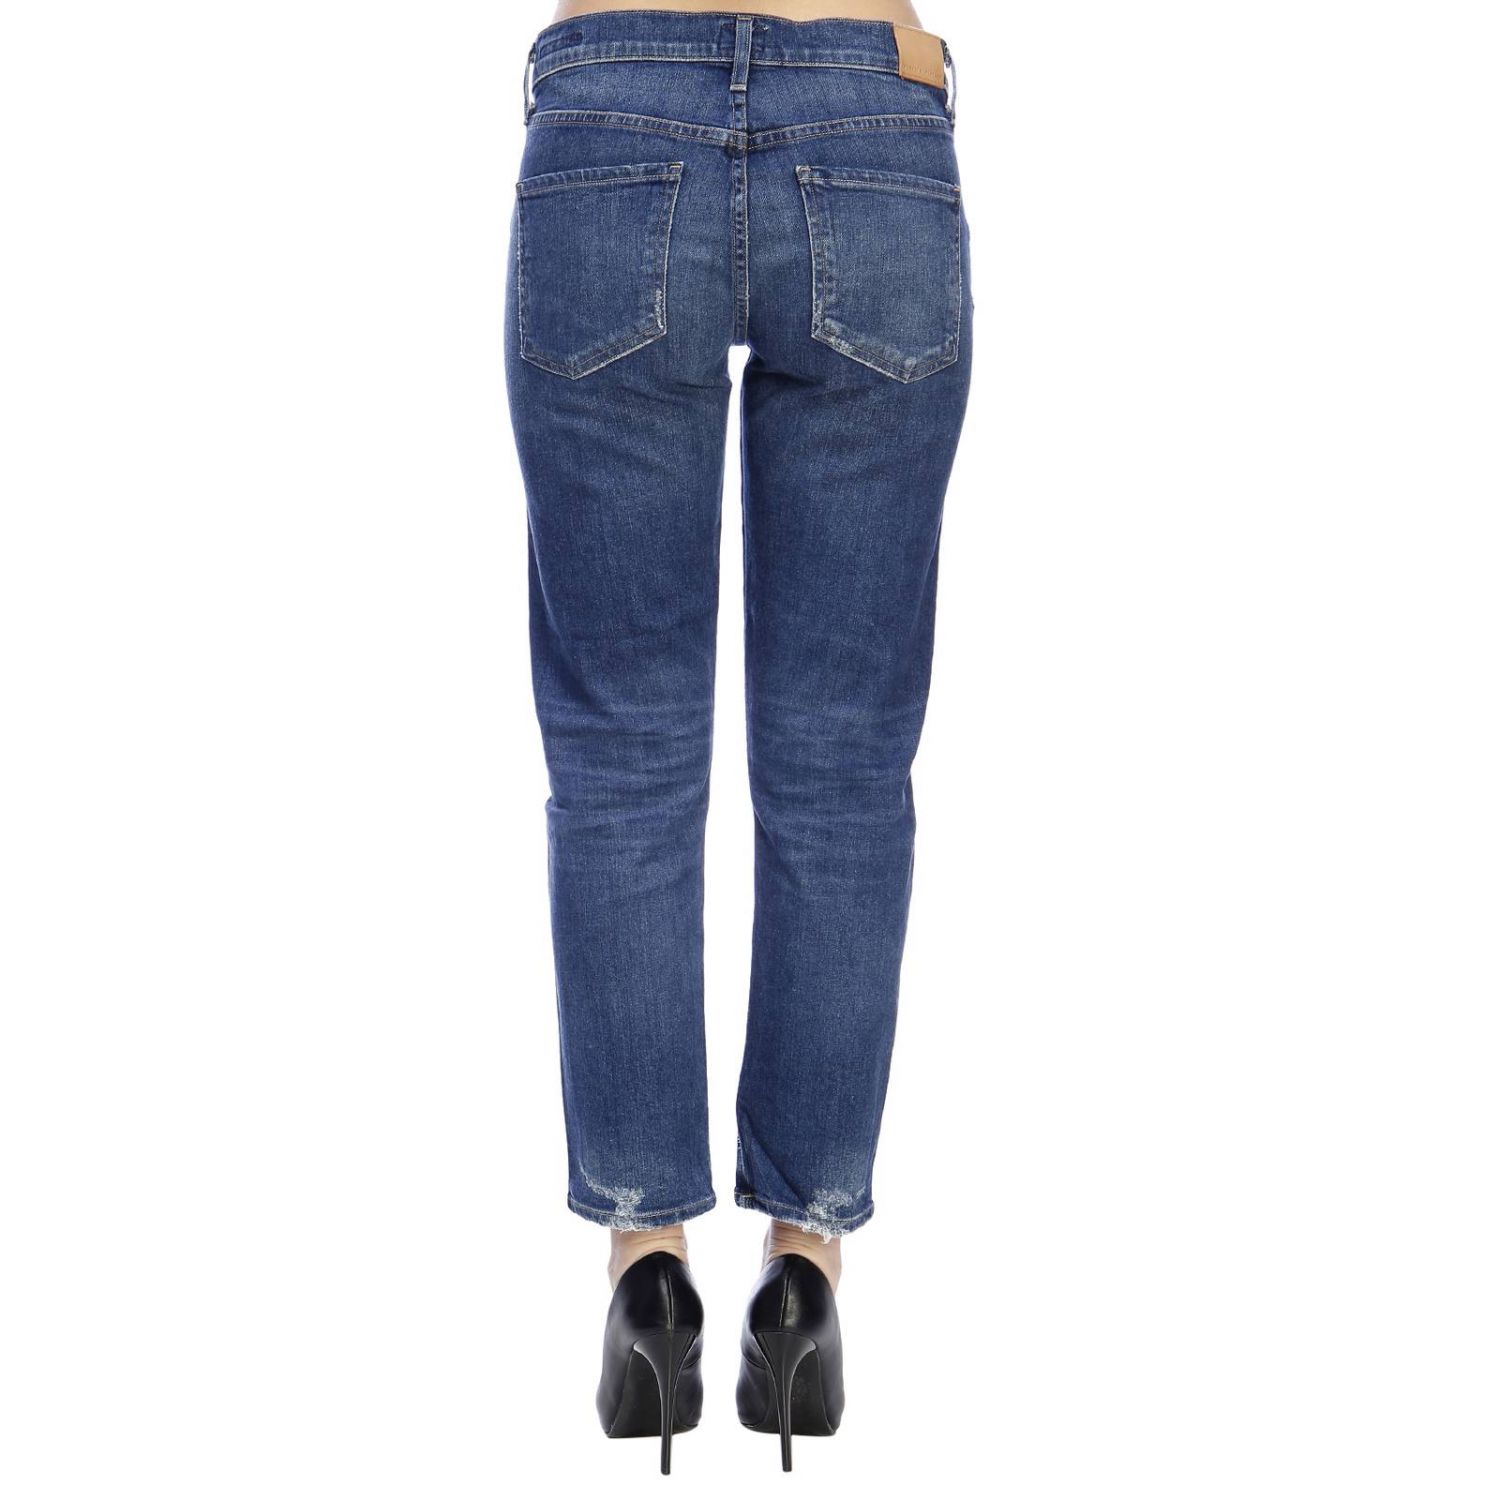 Citizens Of Humanity Outlet: Jeans women - Blue | Jeans Citizens Of ...